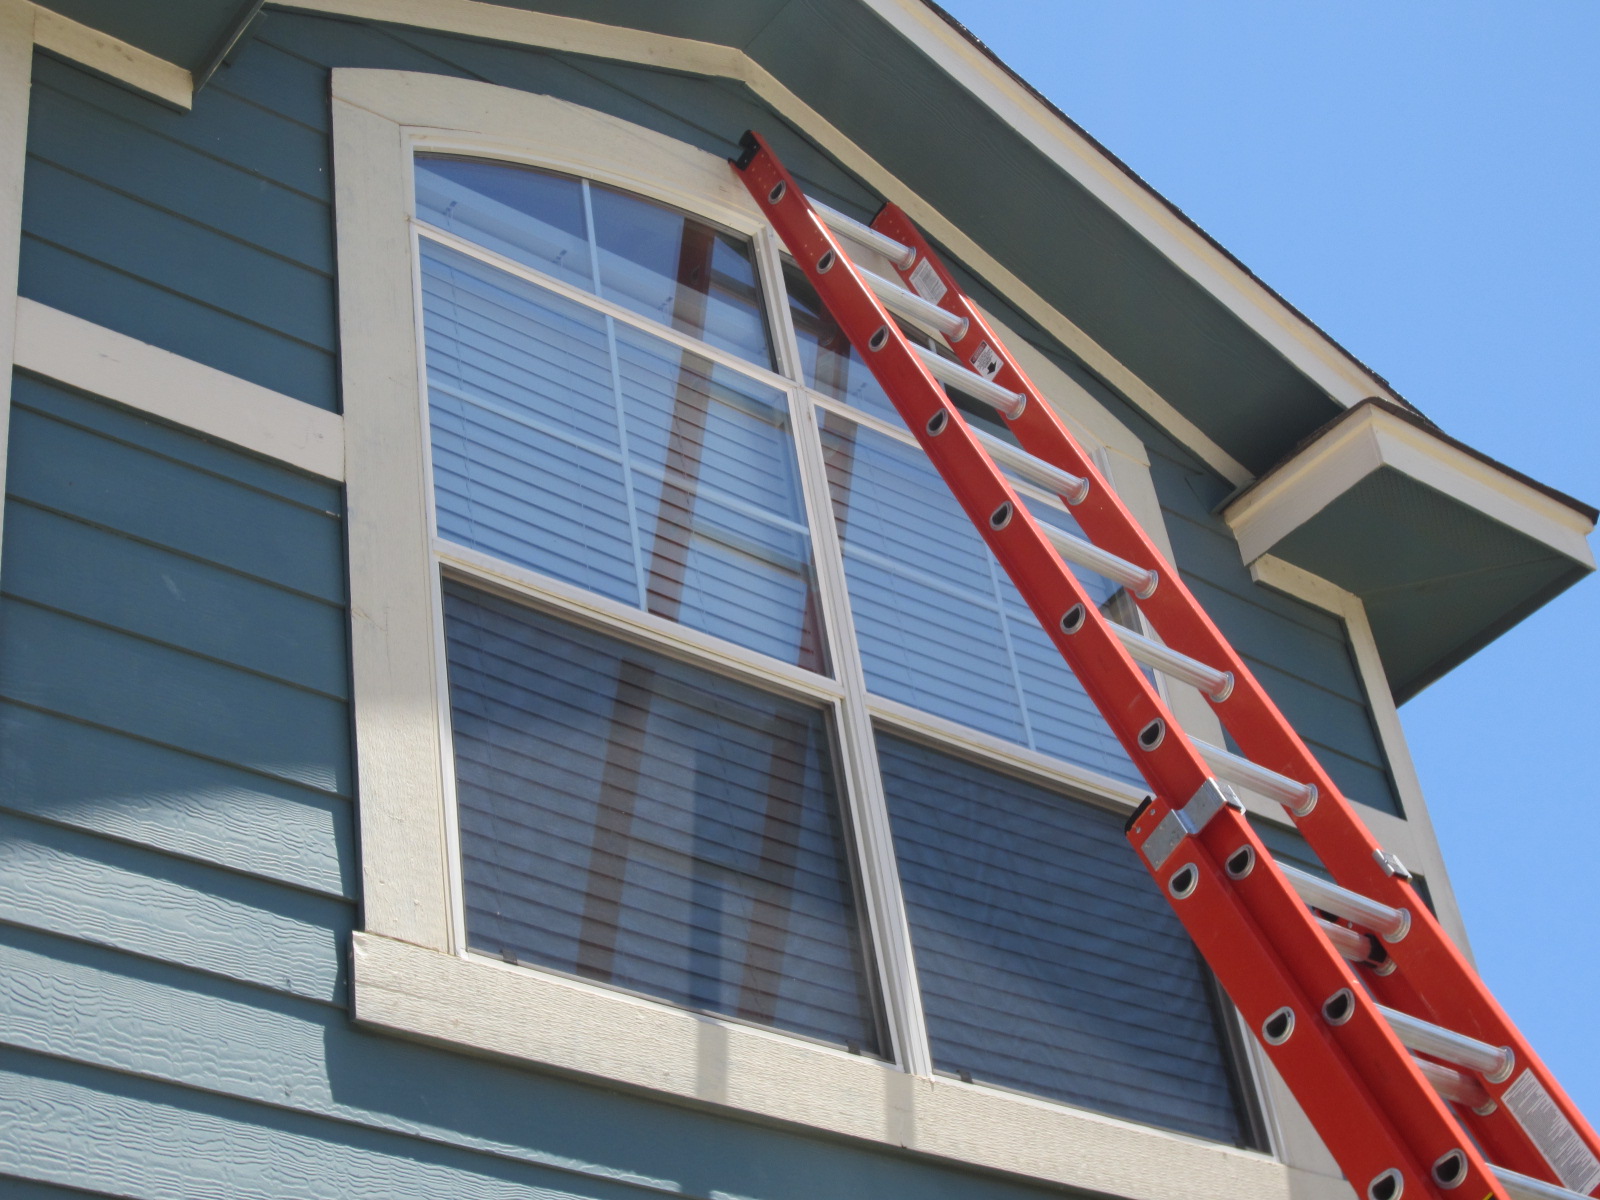 Bug screens fit into the opening part of single hung windows.